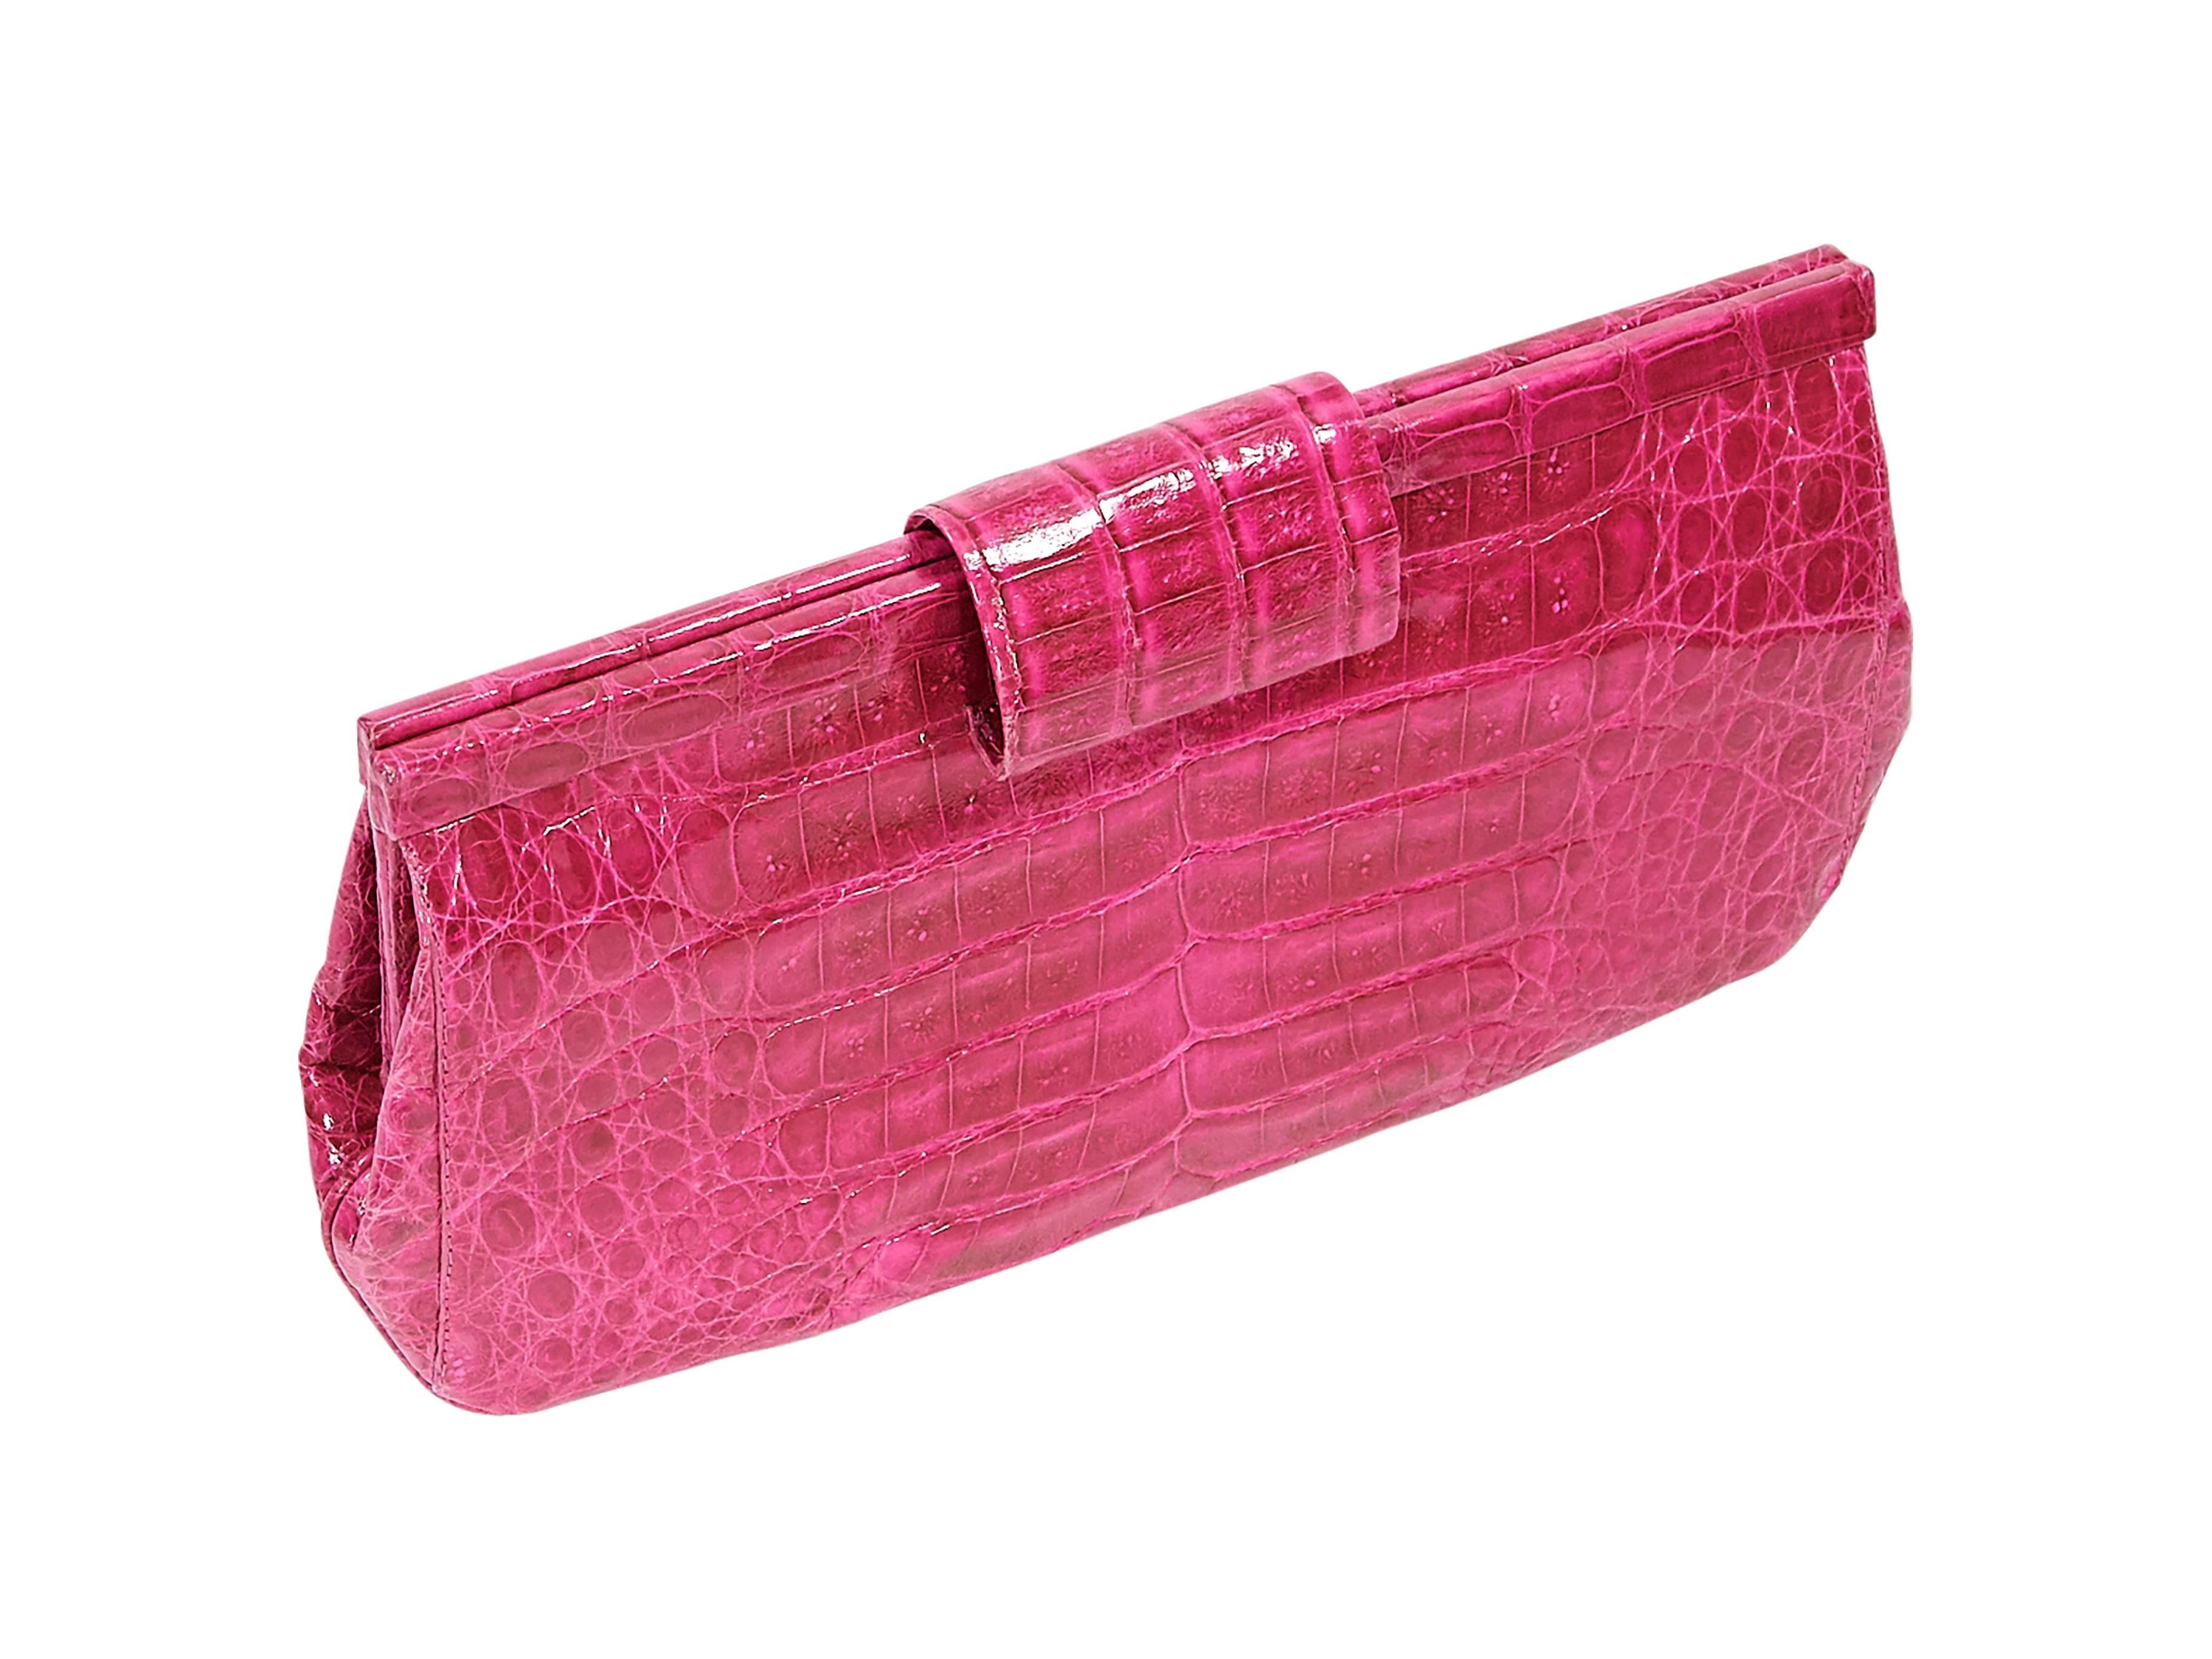 Product details:  Exotic magenta crocodile clutch by Nancy Gonzalez.  Top strap closure.  Lined interior with inner zip and slide pockets.  10.25"L x 5"H x 1.2"D.
Condition: Pre-owned. Very good.

Est. Retail $ 2,000.00
